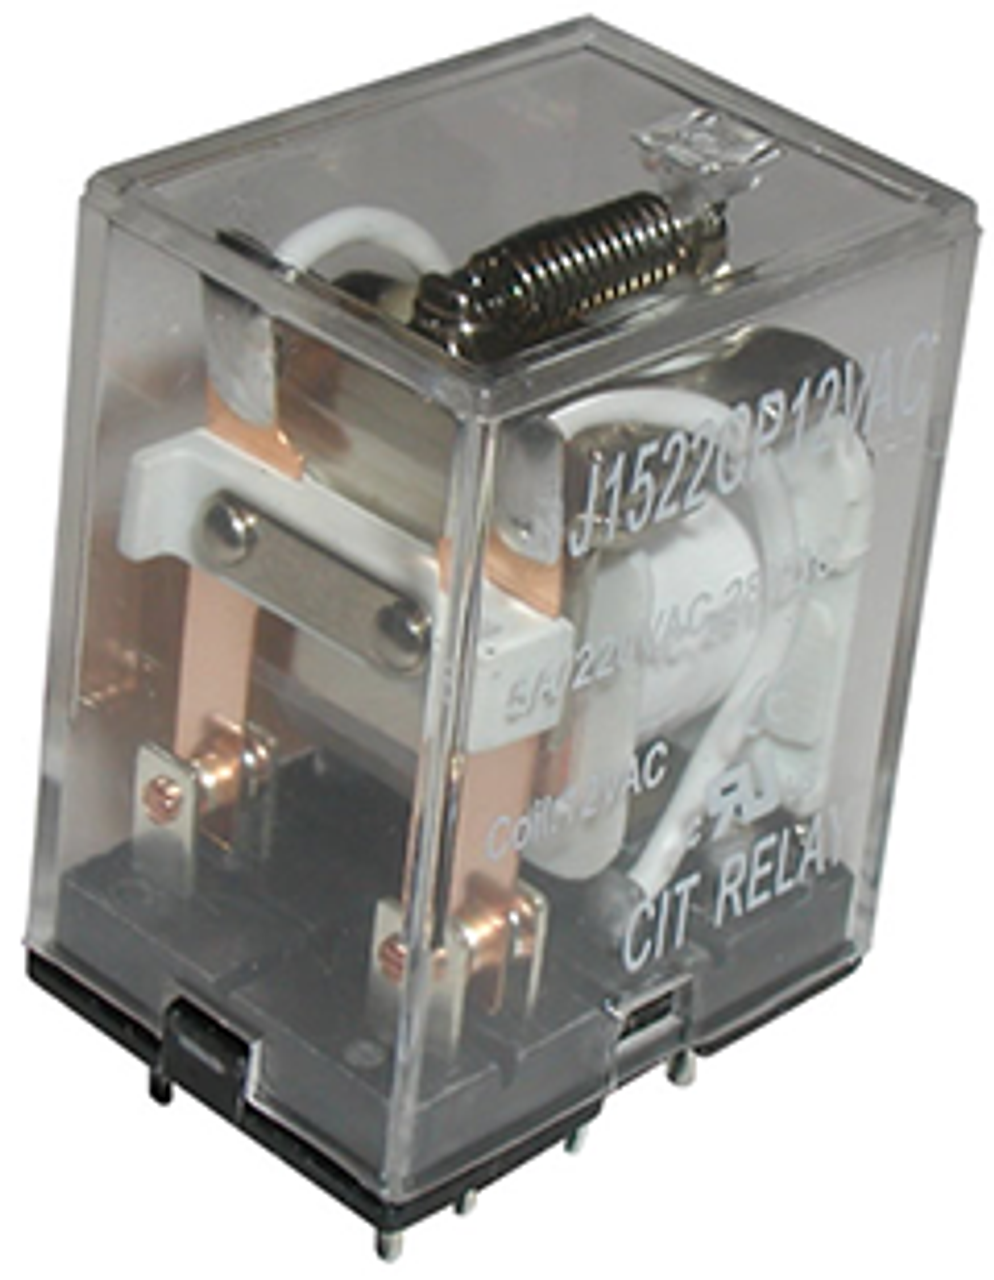 CIT Relay and Switch J1522CT110VDCD Industrial Relays